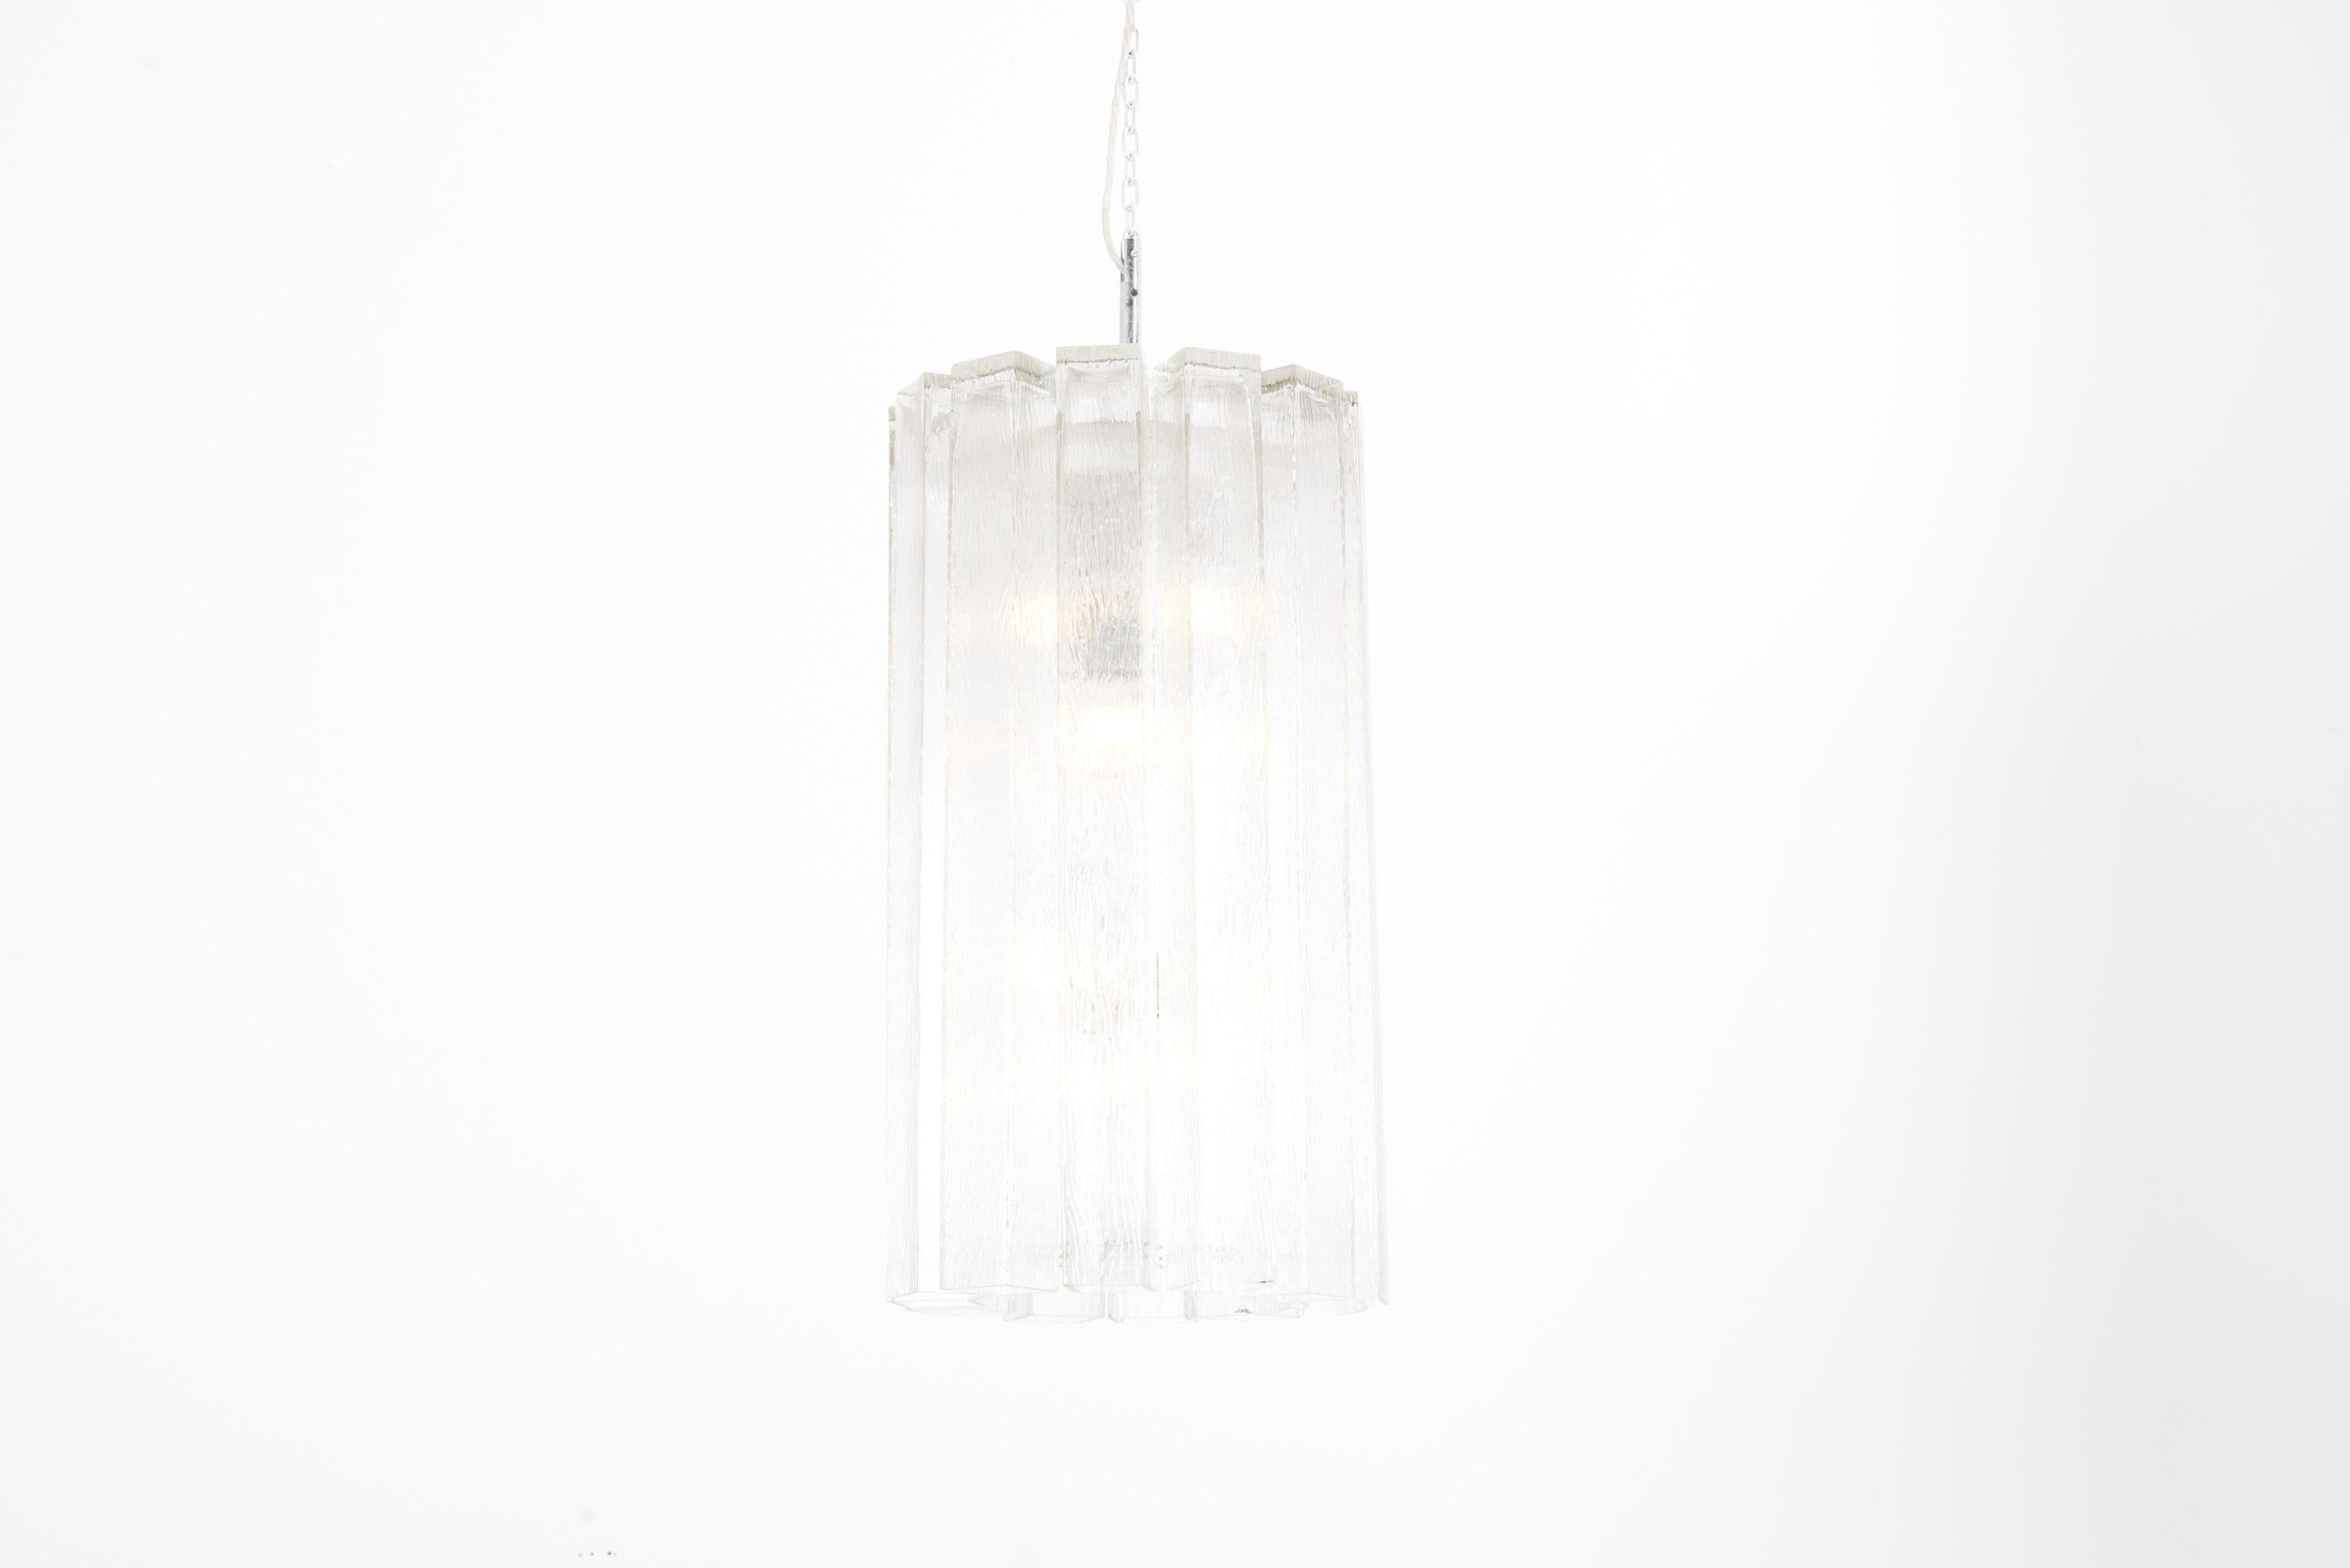 Pendant lamp, manufactured 1970s by Doria in Germany.
Made with icicle finish square glass tubes mounted on chrome and white enameled metal hardware.

8 x E27 sockets.

Please note: Lamp should be fitted professionally in accordance to local